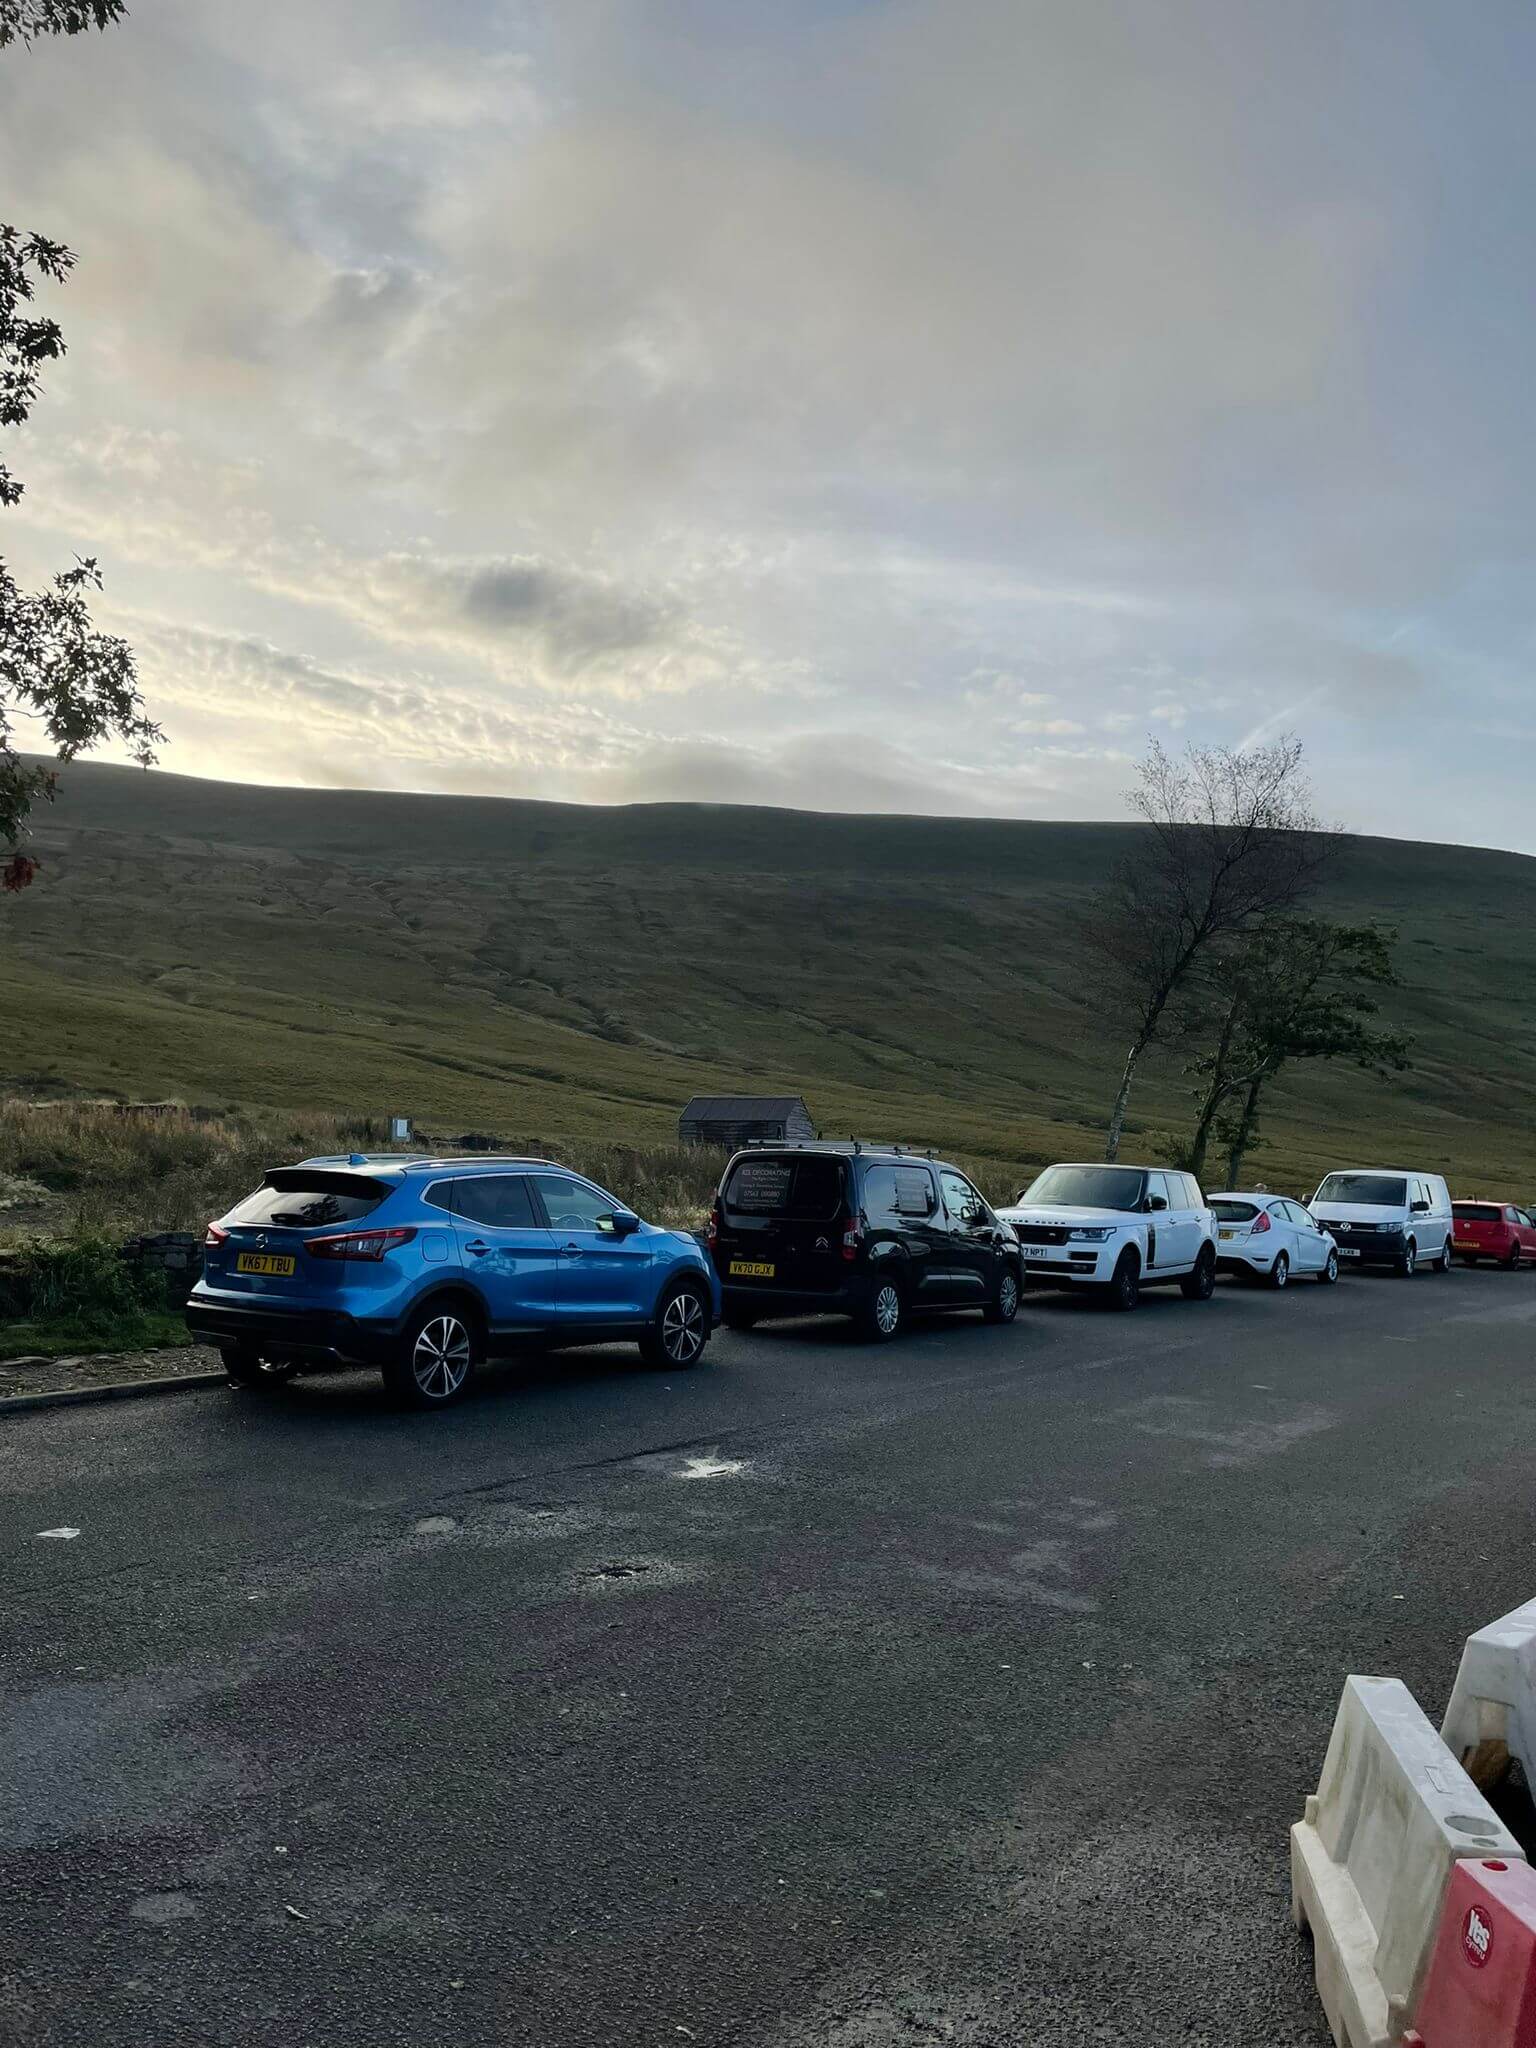 Pen Y Fan Car Park with blue car and Pitstops sign in front and four other vehicles